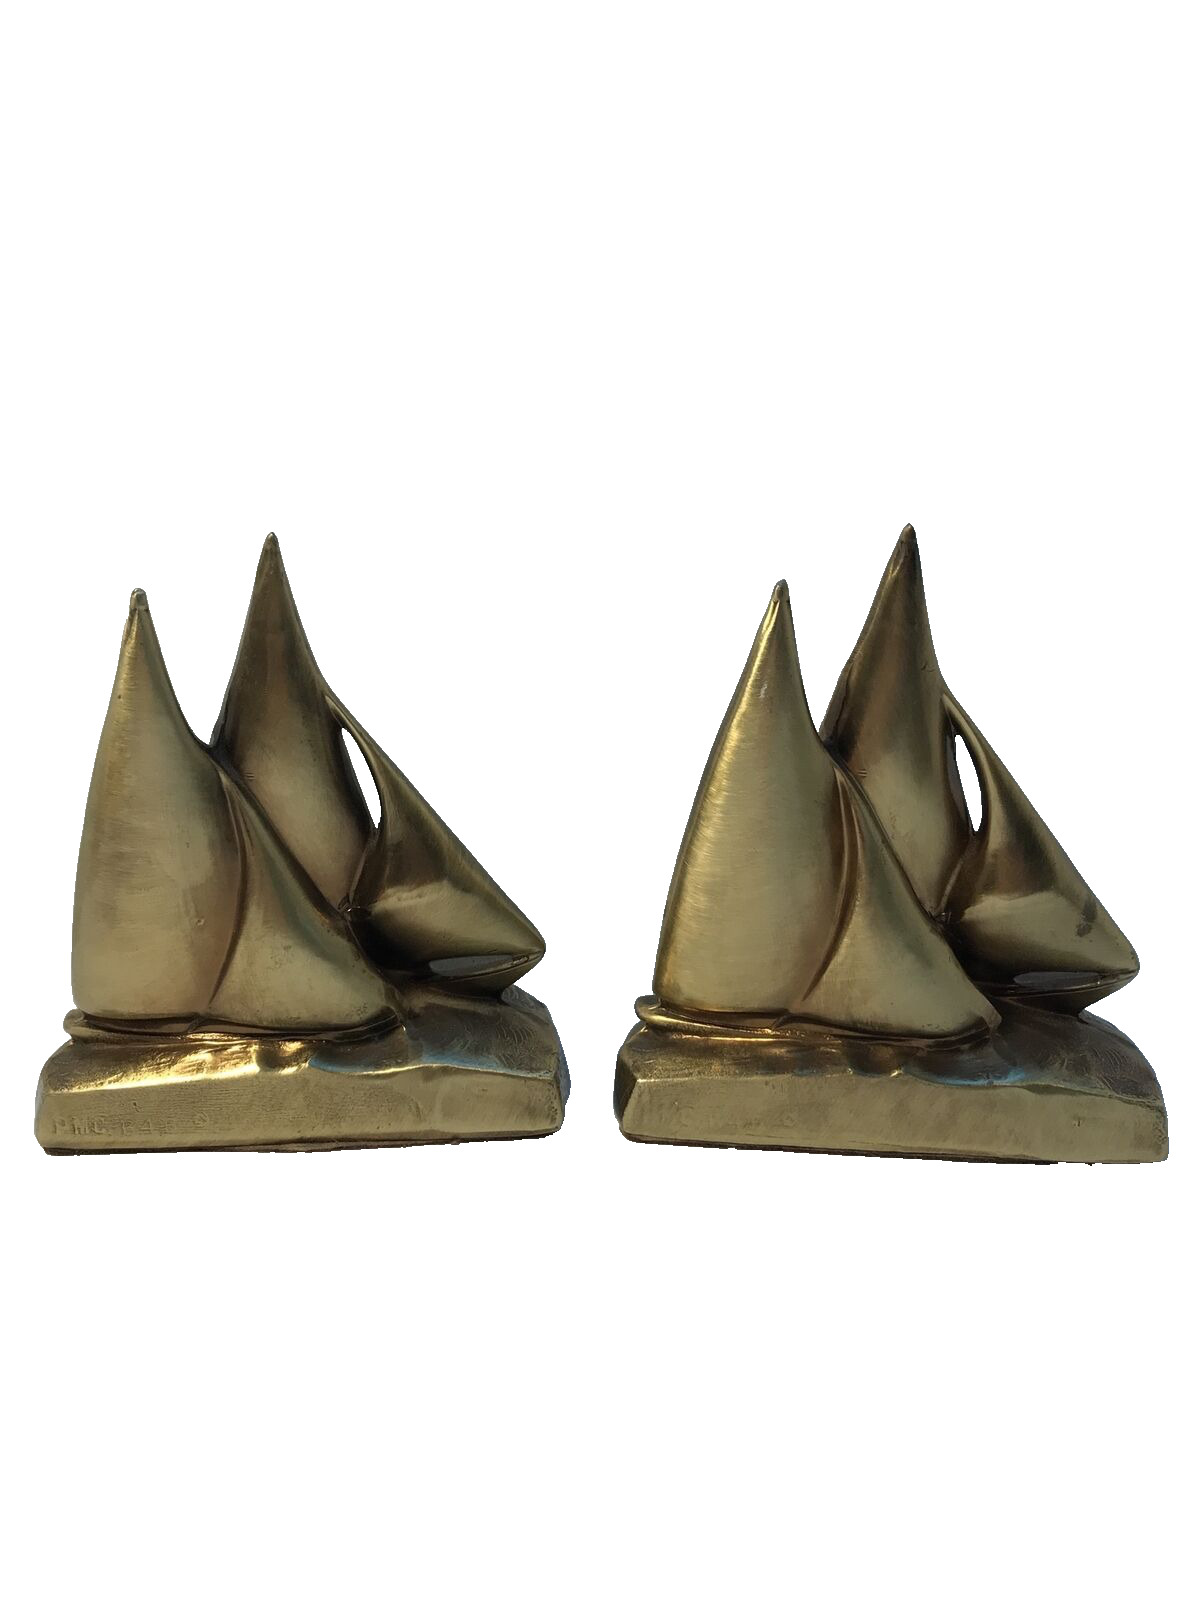 VTG Brass PM CRAFTSMAN Sailboat Bookends, Navy Nautical Sailing, Handcrafted USA